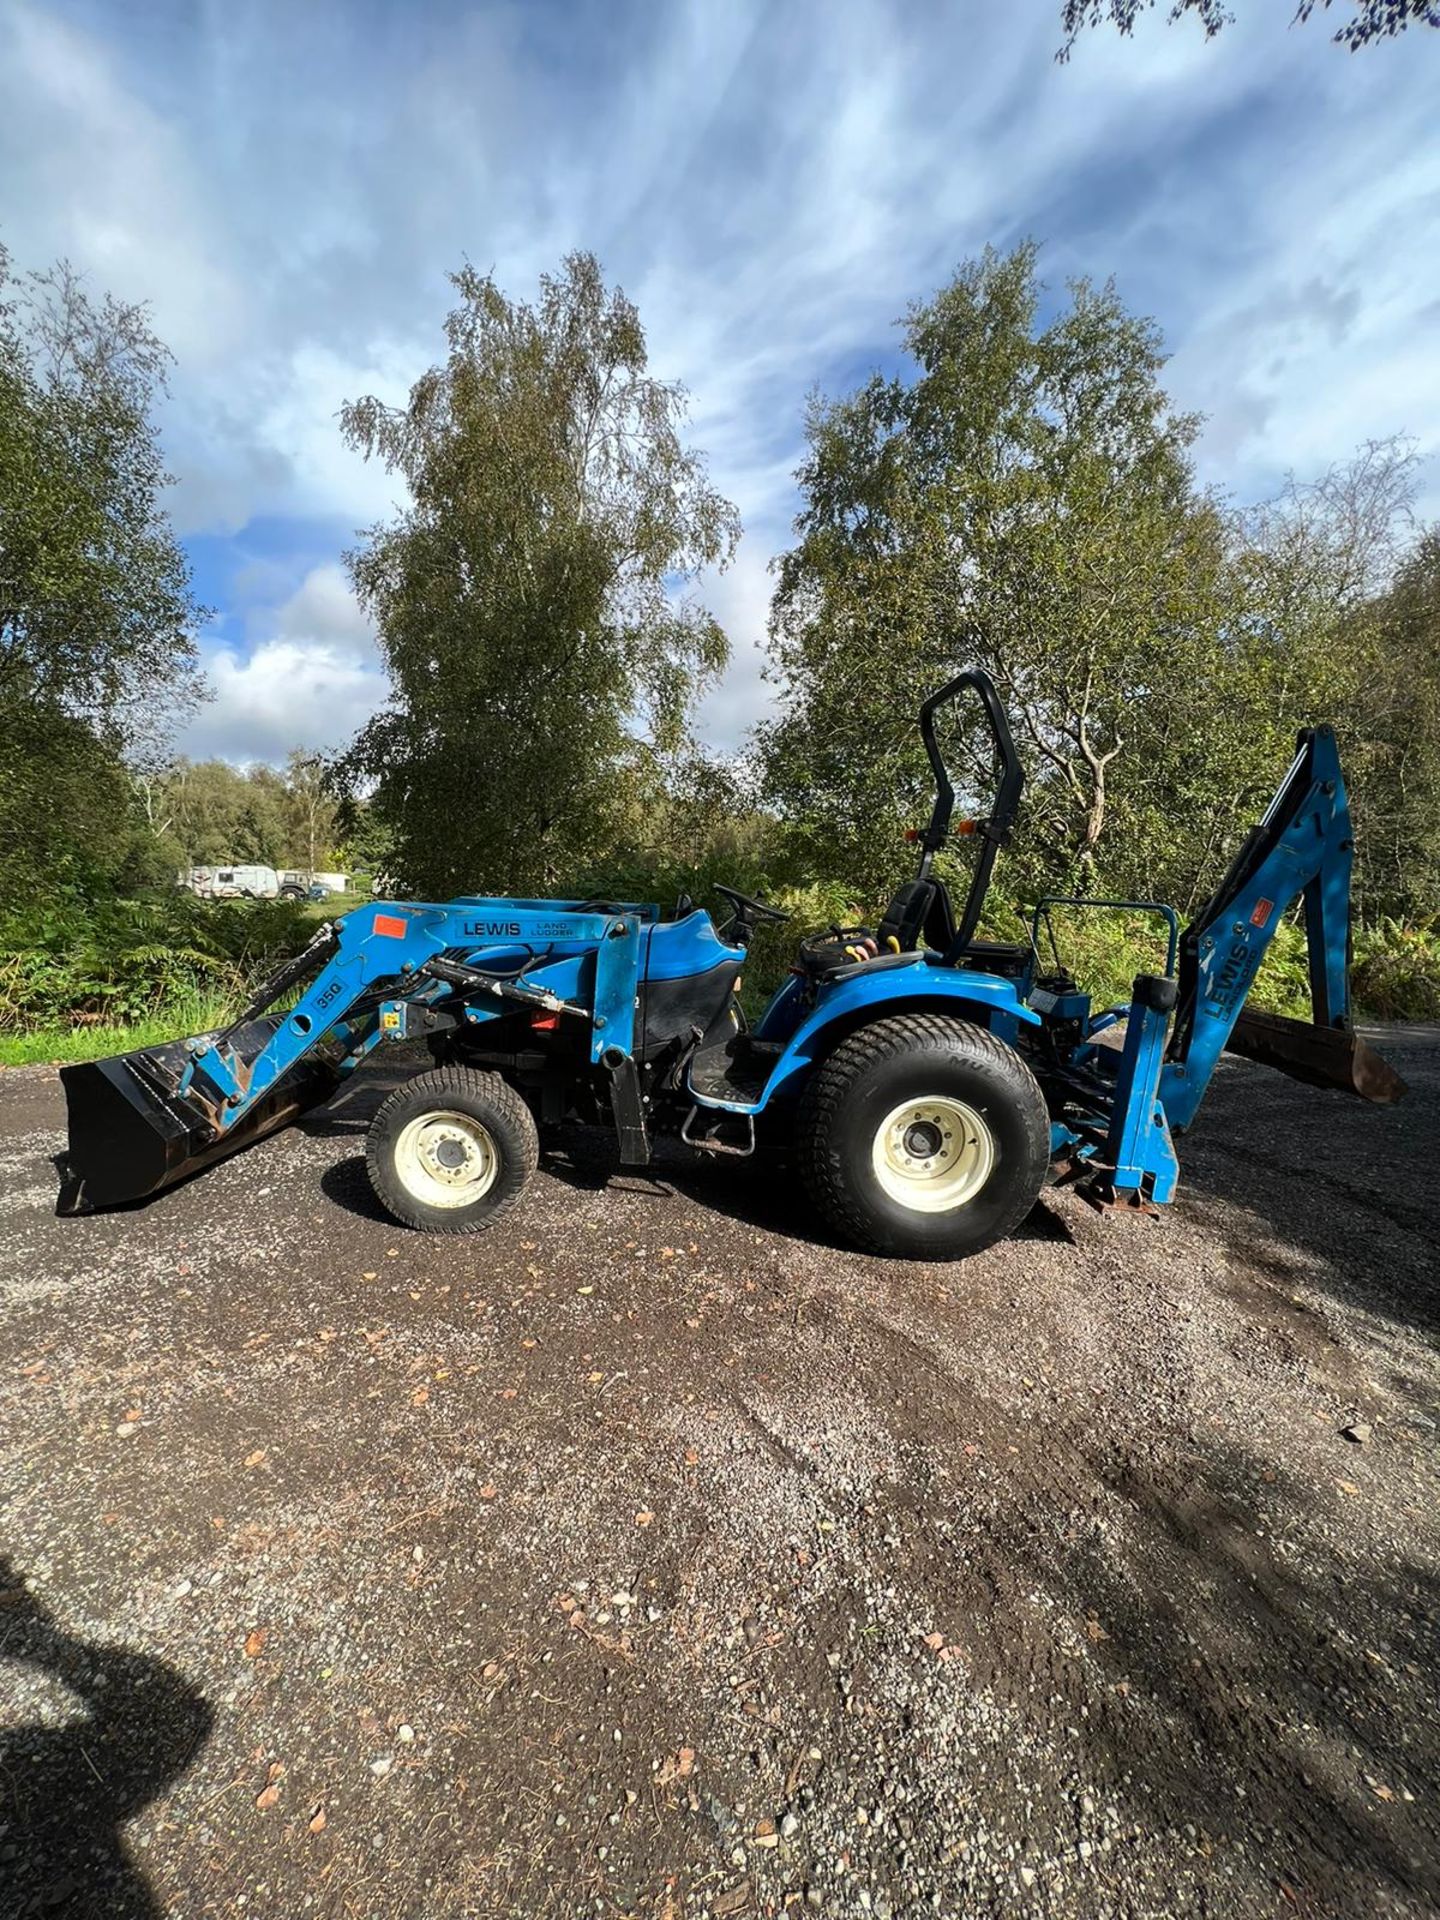 NEW HOLLAND TC27D BACK LOADER, SPOOL VALVE, ROLL PTO - Image 16 of 23